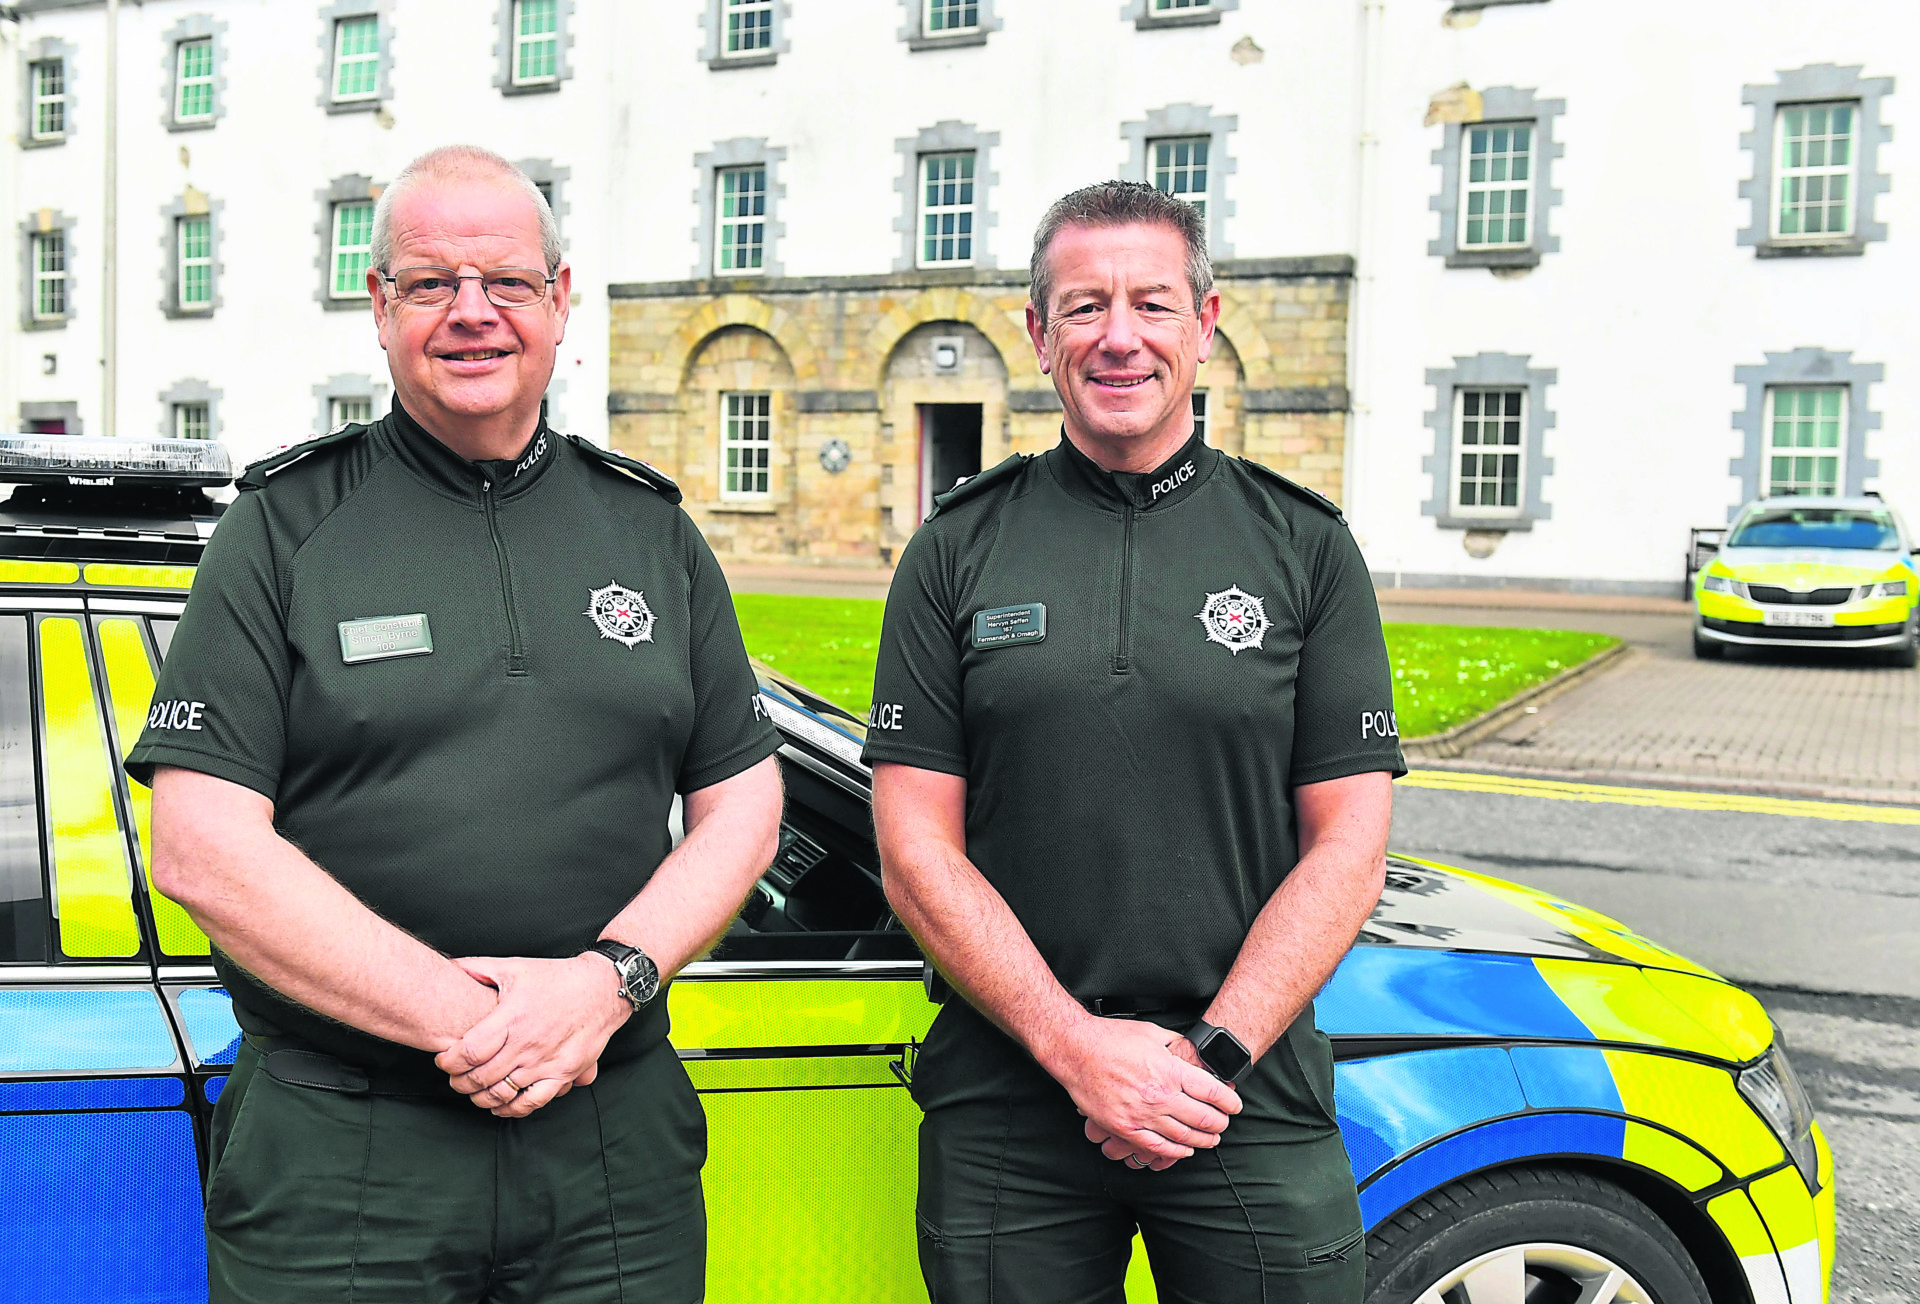 Omagh’s new police chief relishing role in rural Tyrone